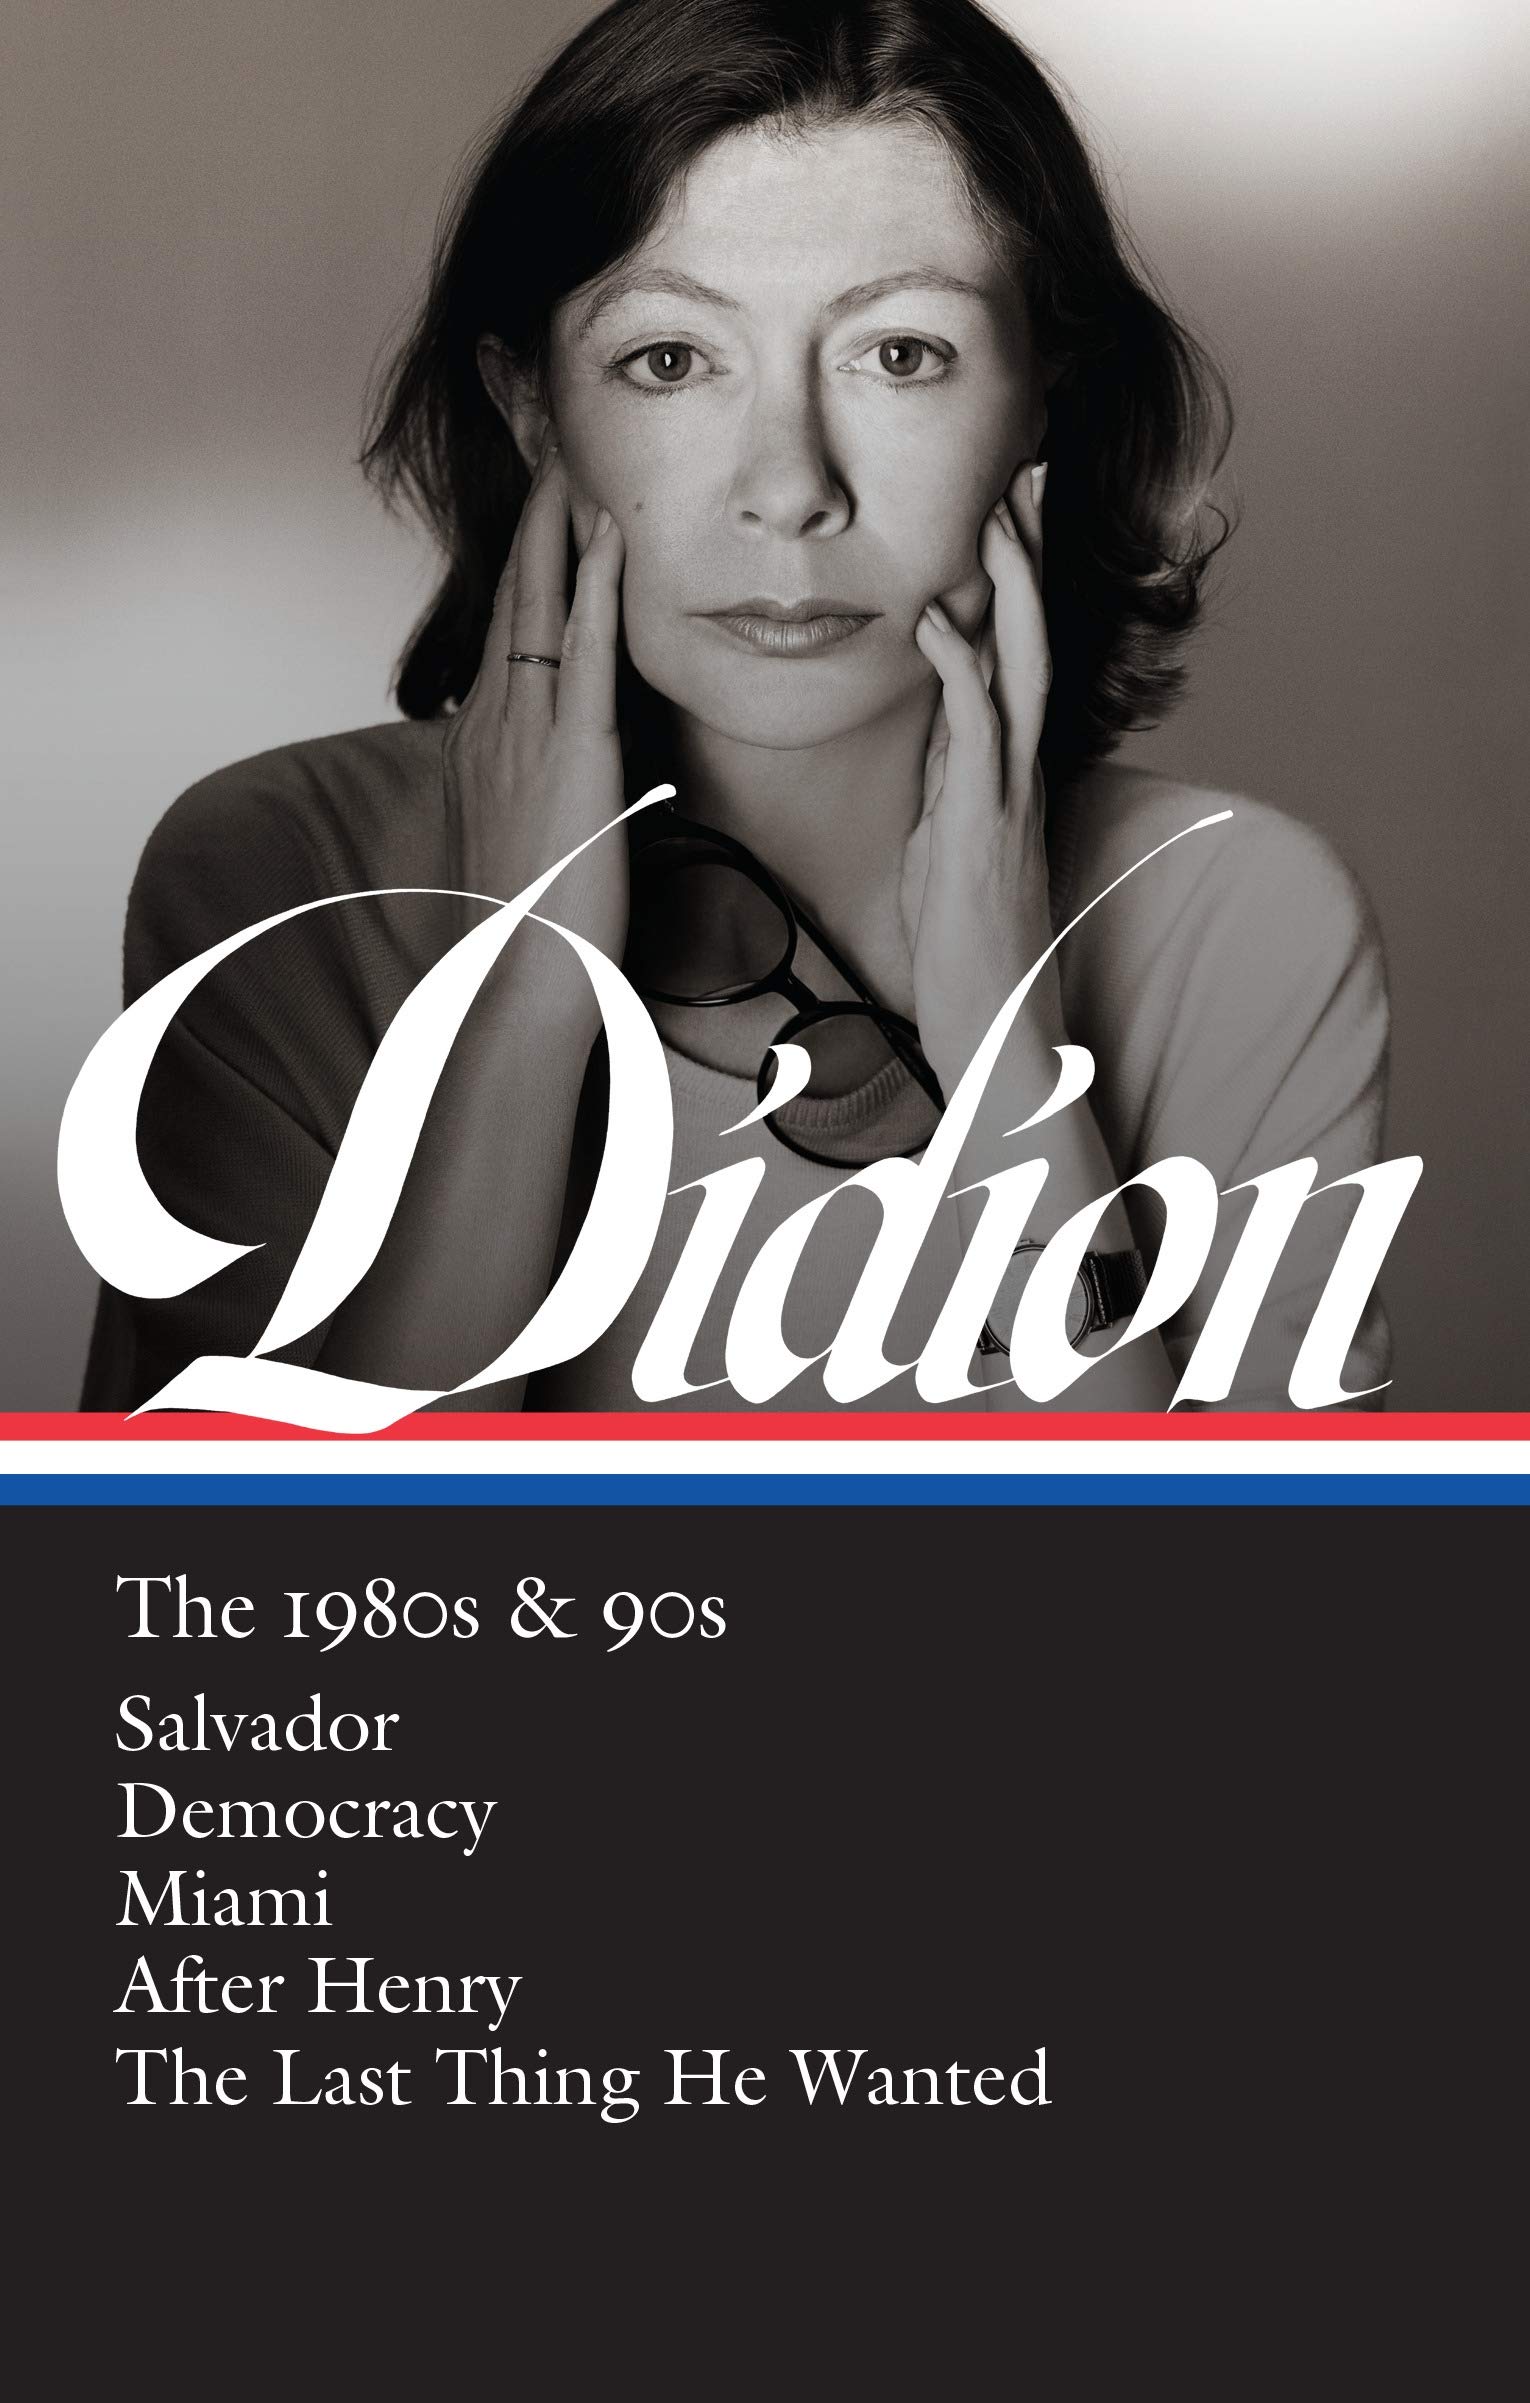 Joan Didion. The 1980s &amp; 90s